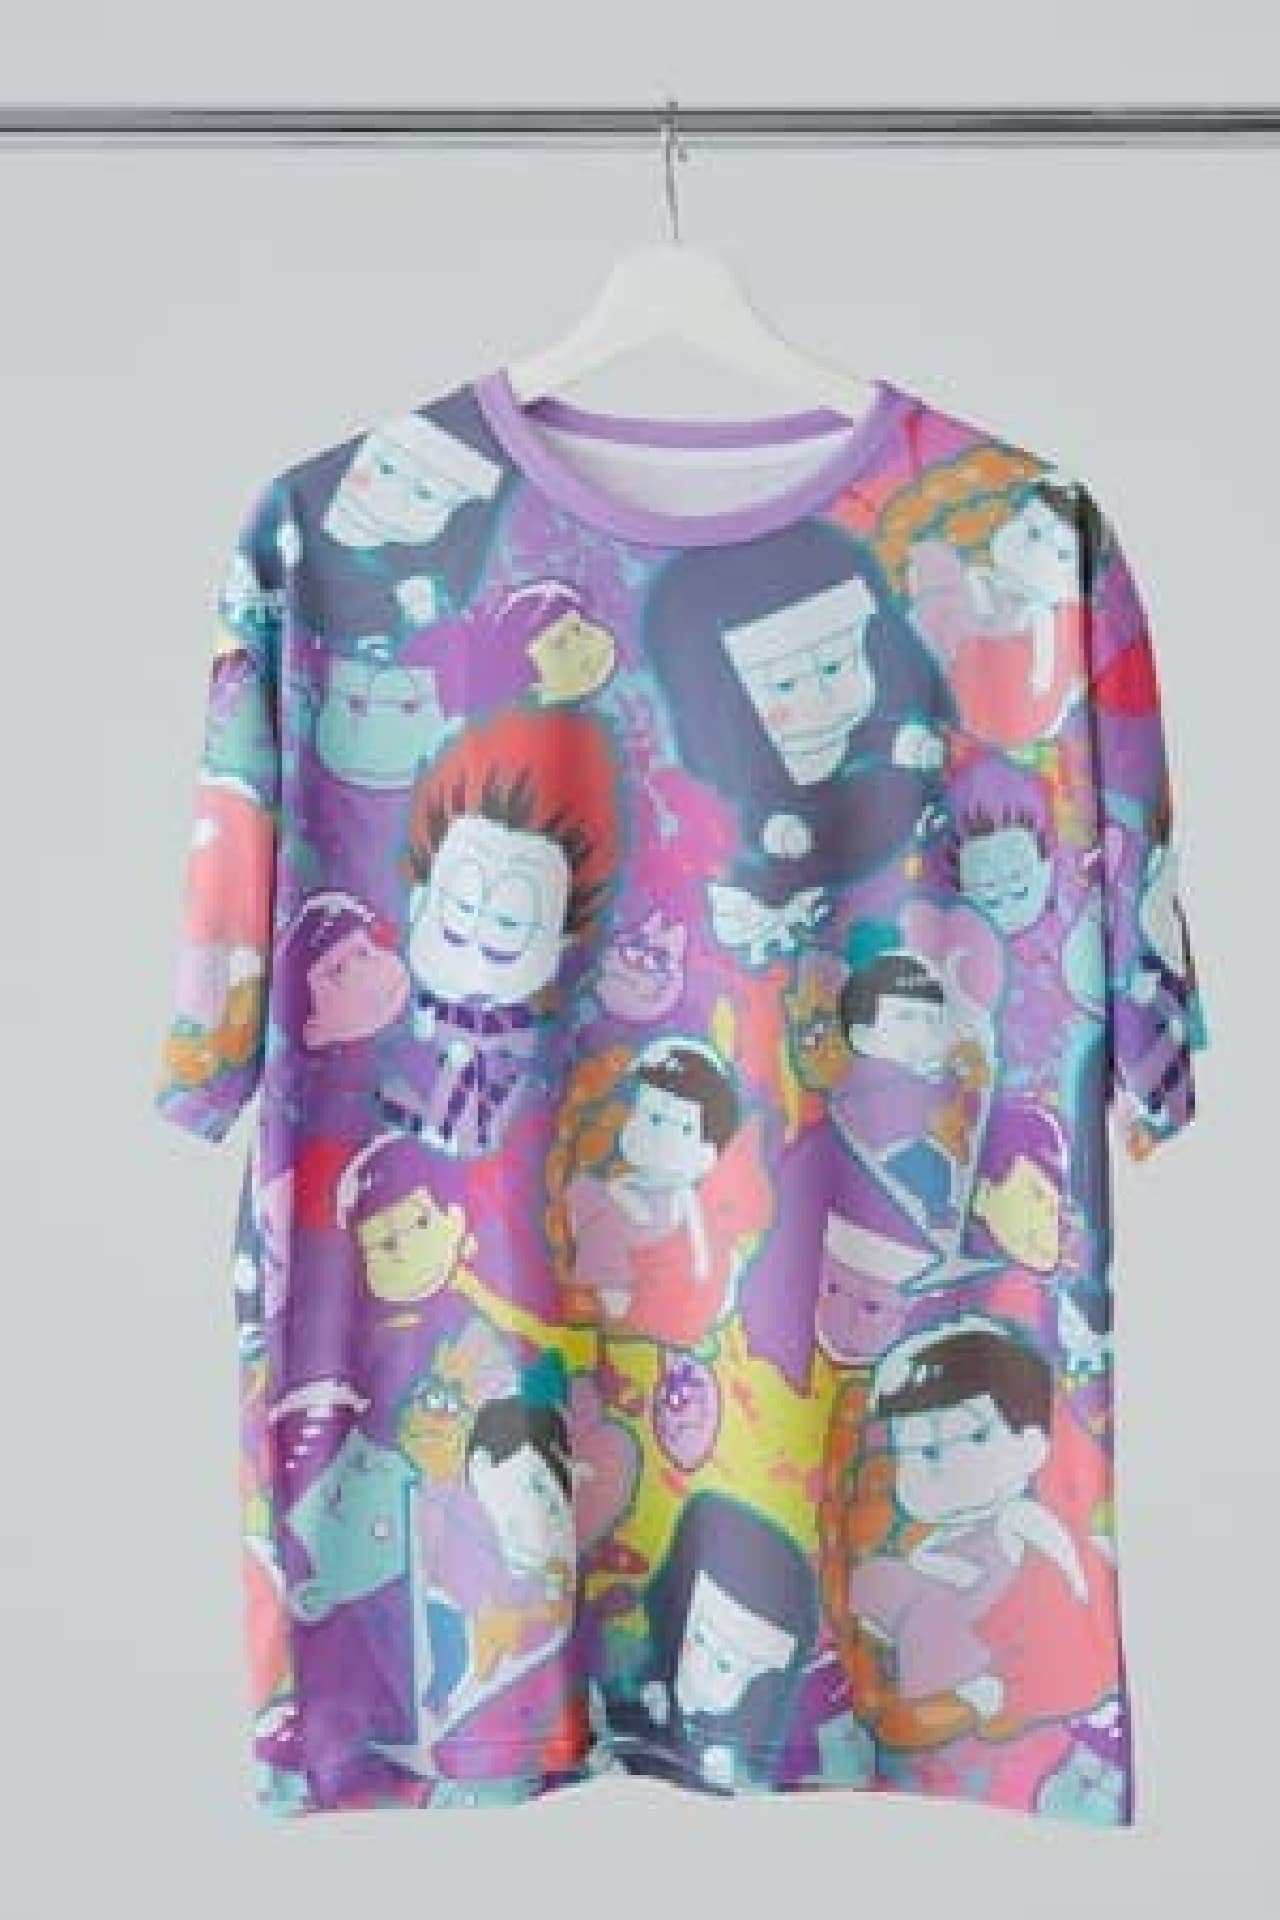 Introducing a washable cloth mask for "Osomatsu-san" --A loose T-shirt with beautifully printed six children